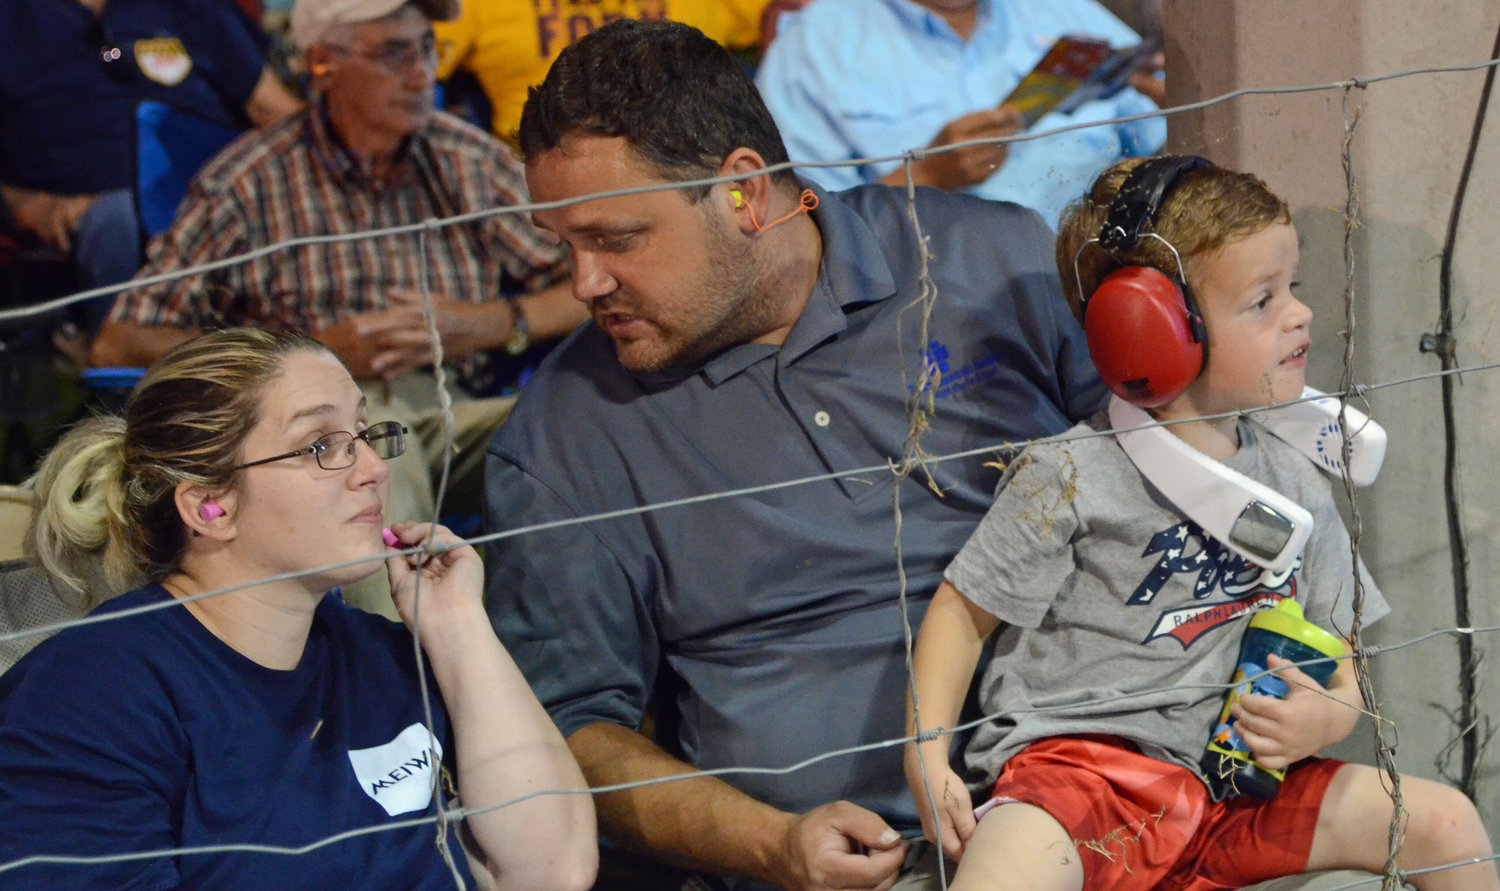 A young fan enjoying the show with his parents Friday night at Chapel Hill.